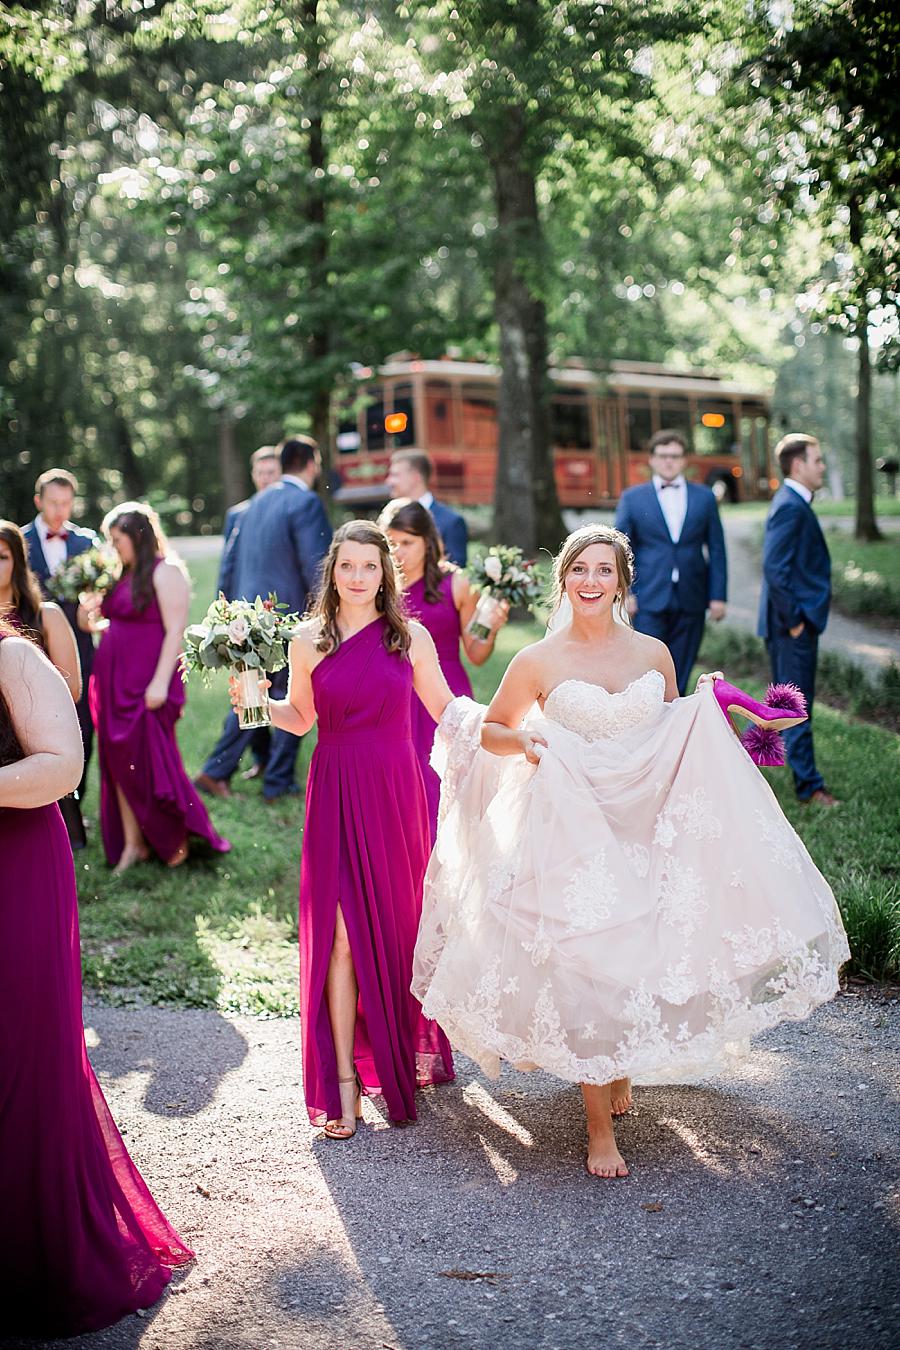 Carrying the dress at this RiverView Family Farm Wedding by Knoxville Wedding Photographer, Amanda May Photos.